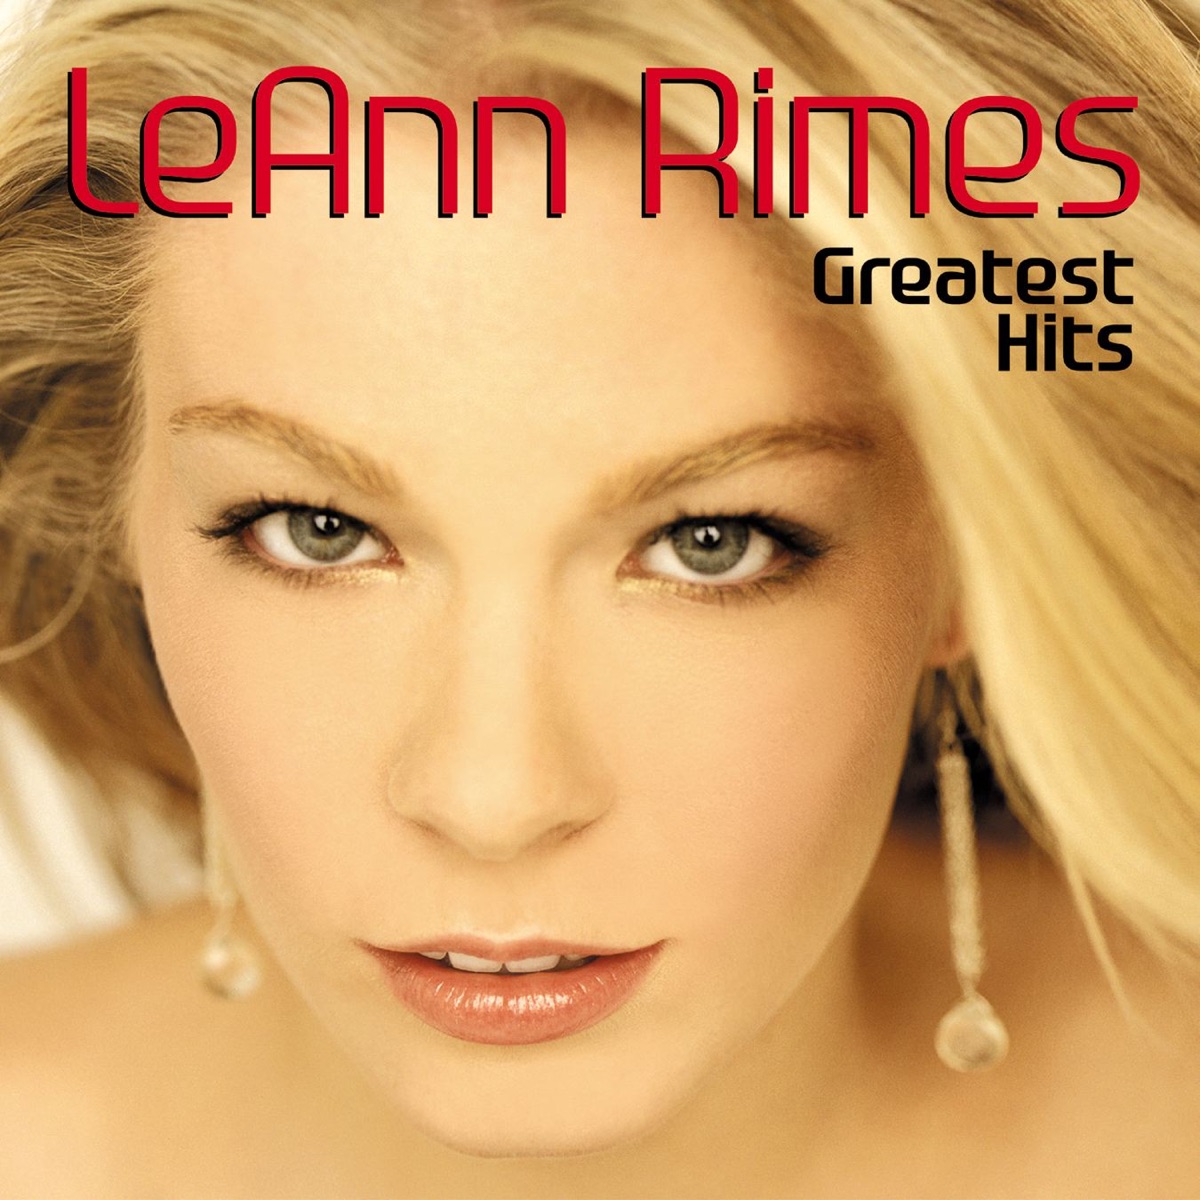 LeAnn Rimes Greatest Hits Album Cover By.